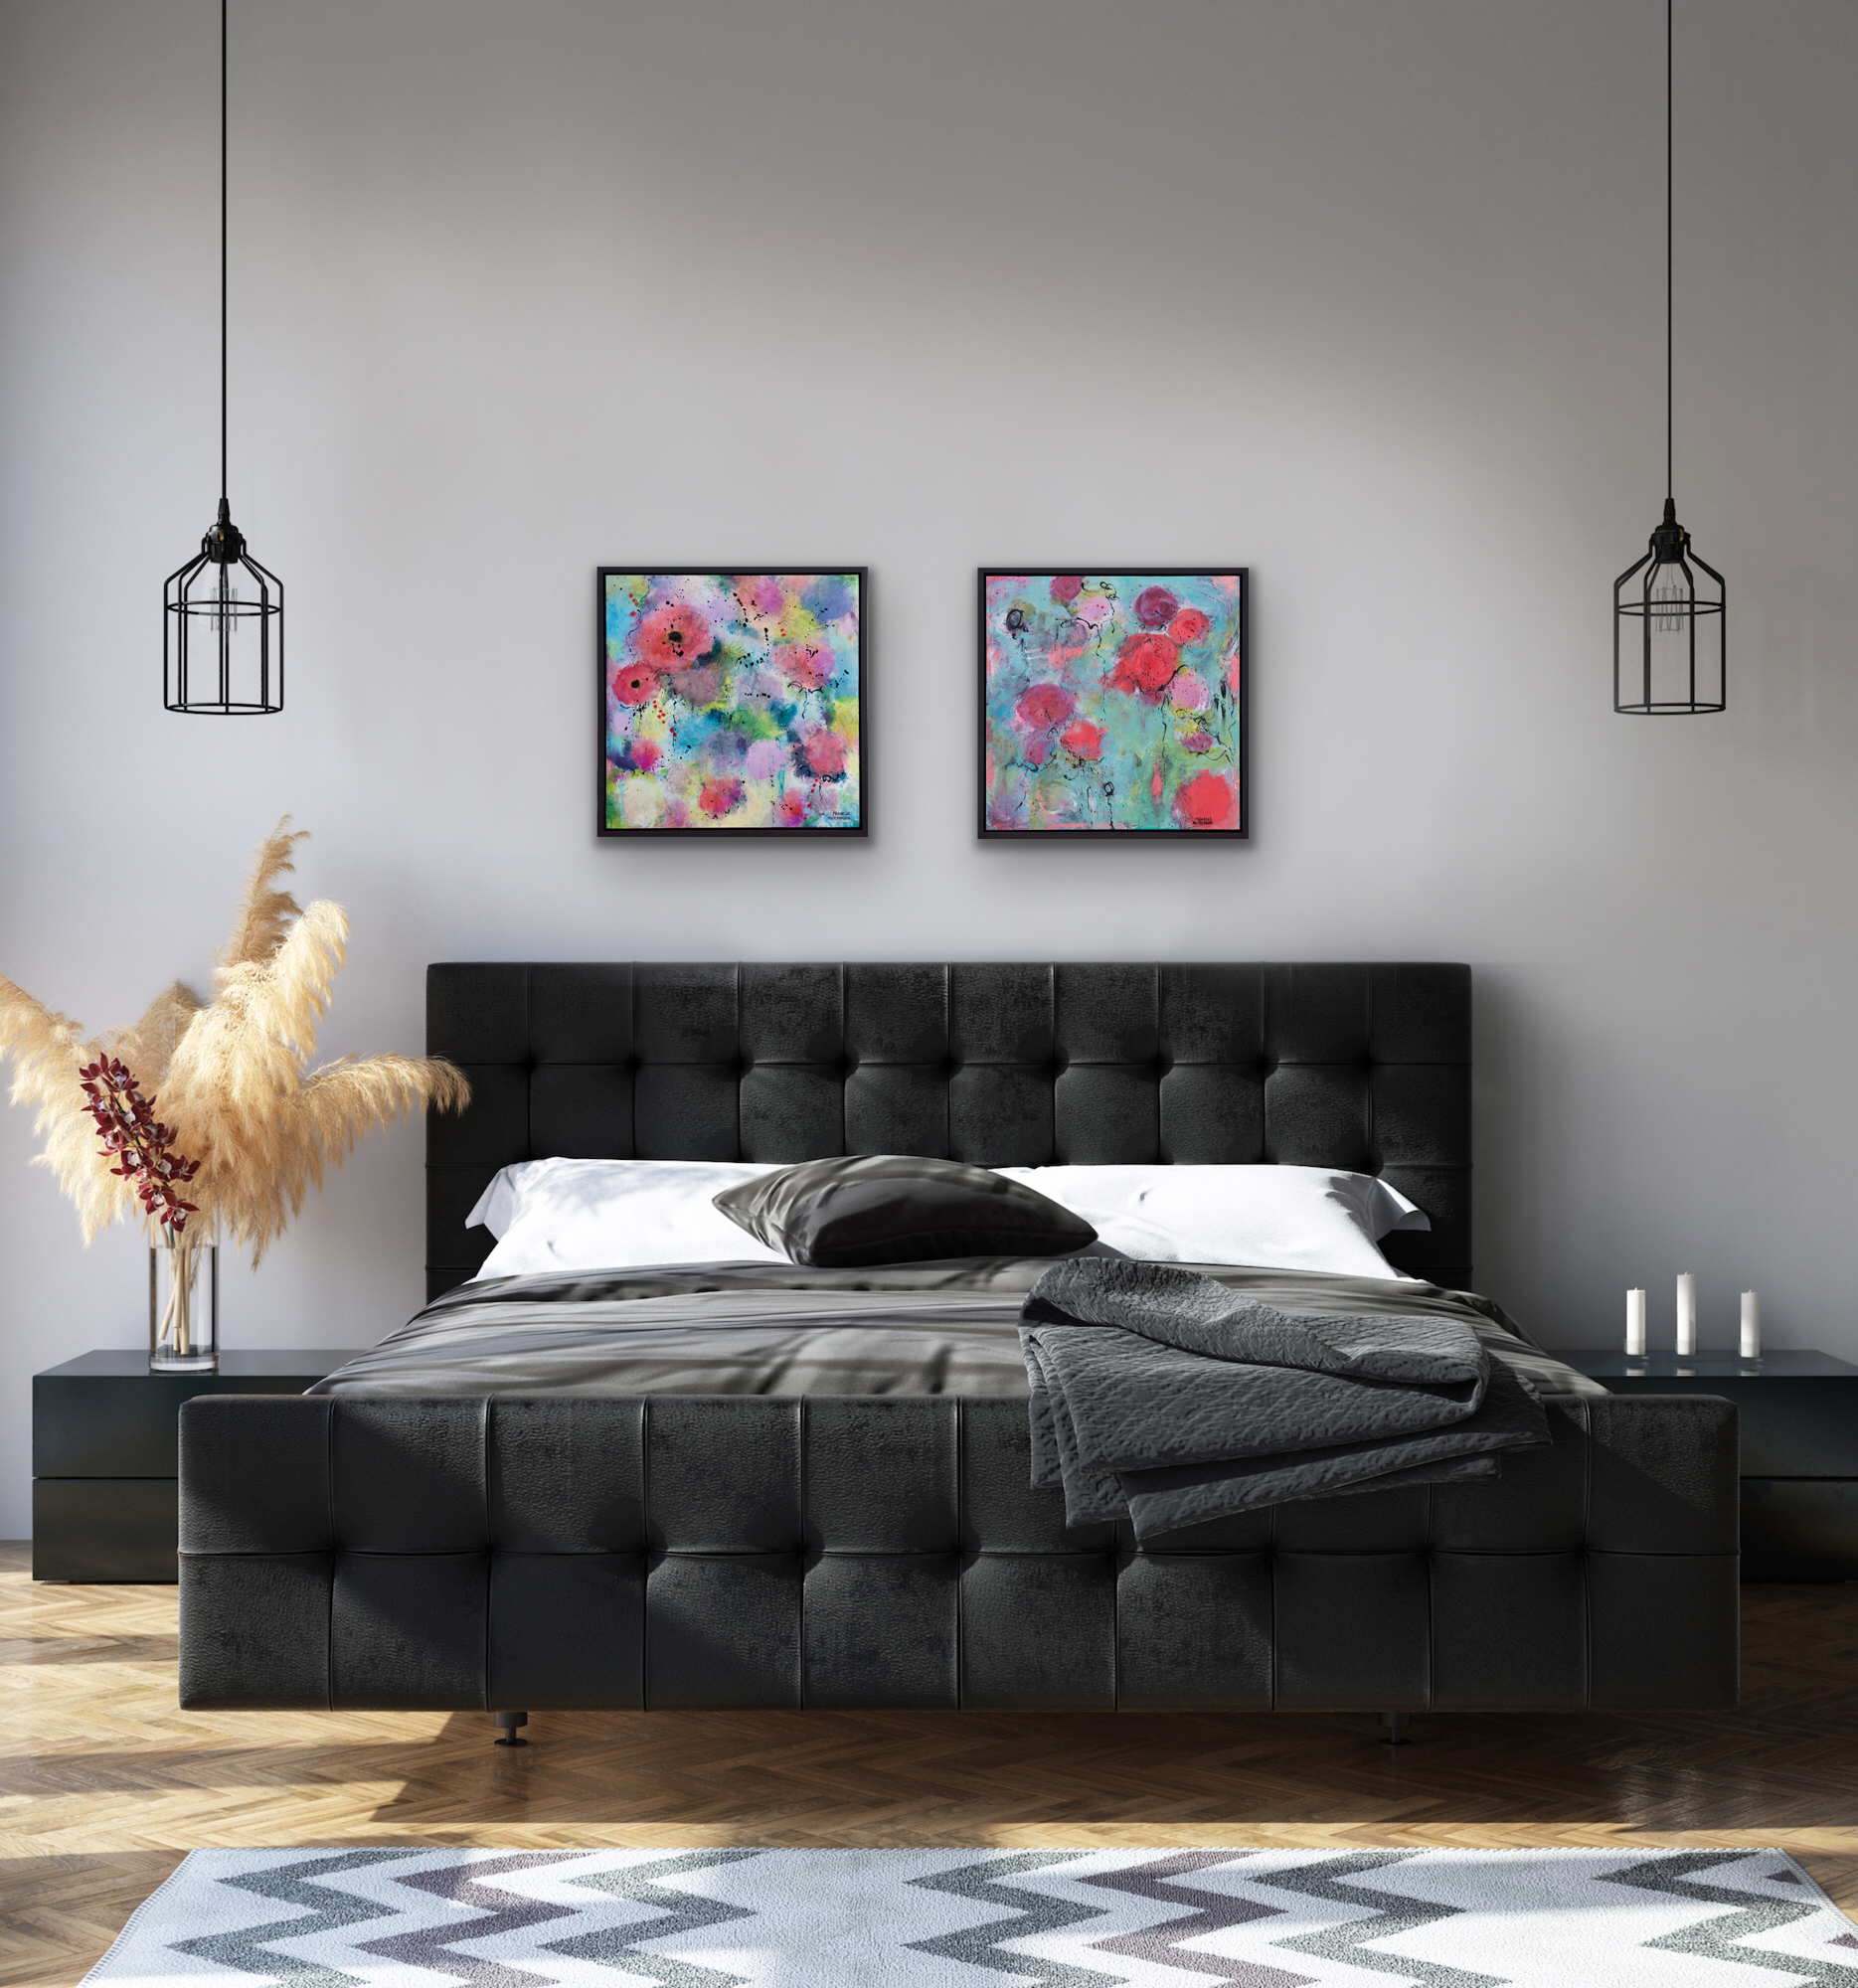 Painting shown above a grey bed. Paired with Melody of Spring